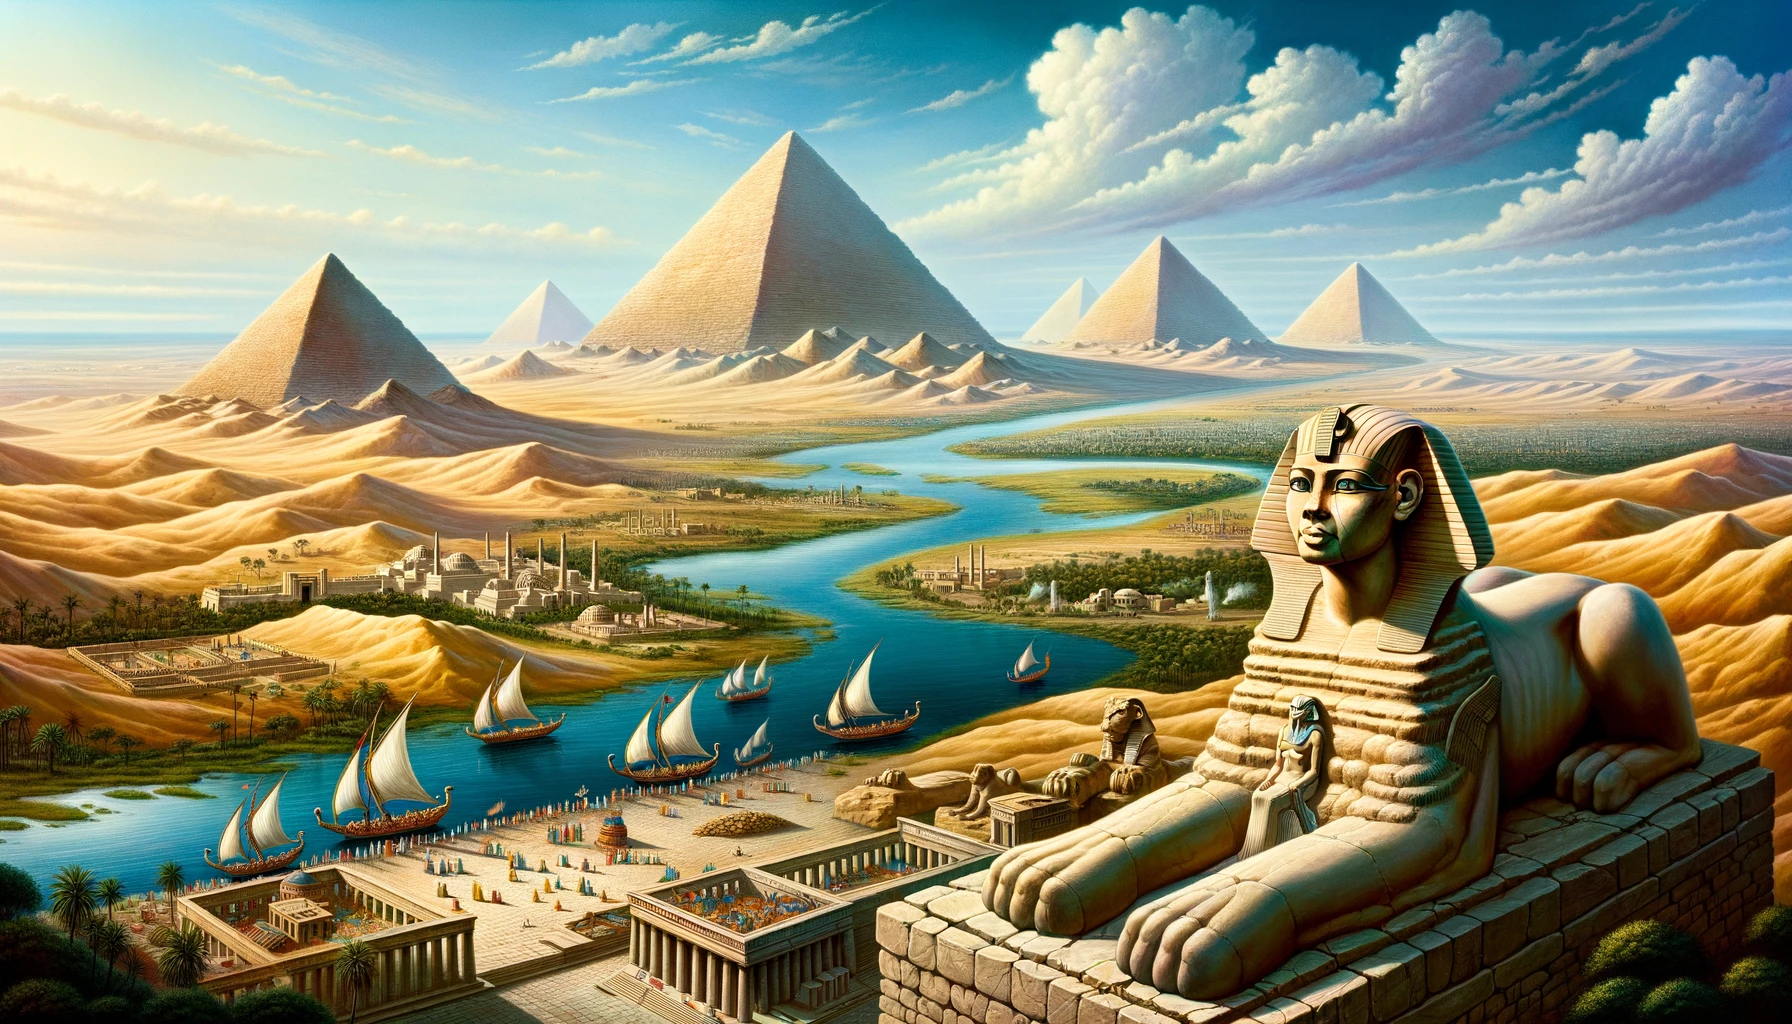 Illustration of a panoramic scene from ancient Egypt. The vast desert landscape is punctuated by the imposing pyramids, their peaks almost touching the clear blue sky. A large sphinx, with the body of a lion and the head of a pharaoh, watches over the land. The Nile River, teeming with life, flows serenely, and on it, boats with colorful sails carry merchants who exchange spices, fabrics, and other treasures.